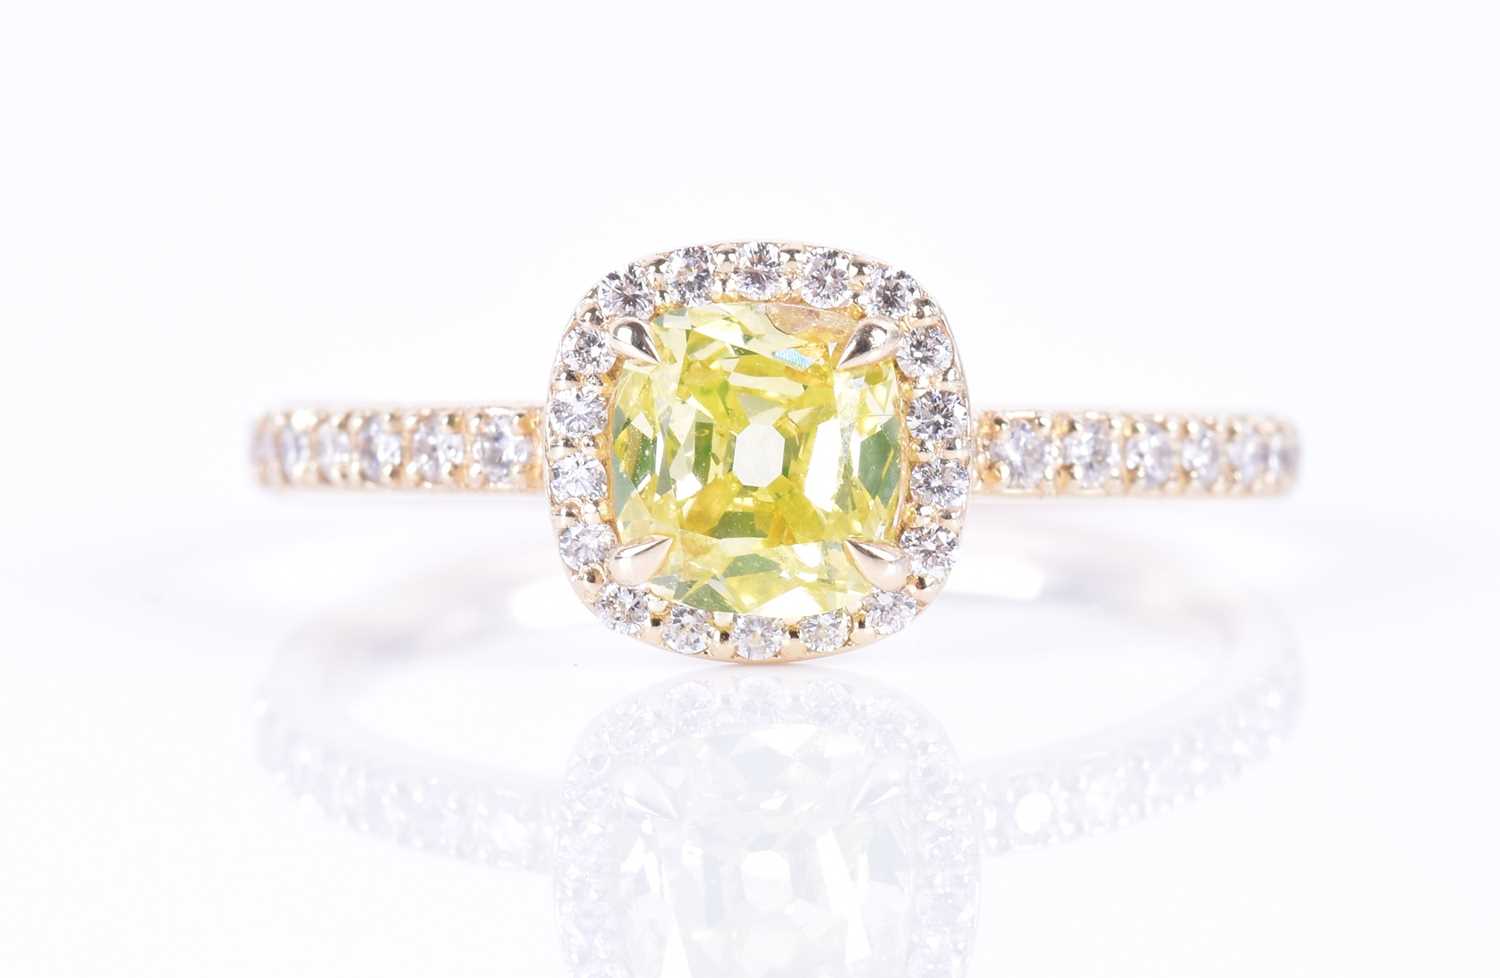 A 14ct yellow gold and yellow diamond halo ringset with a cushion-cut natural fancy intense yellow